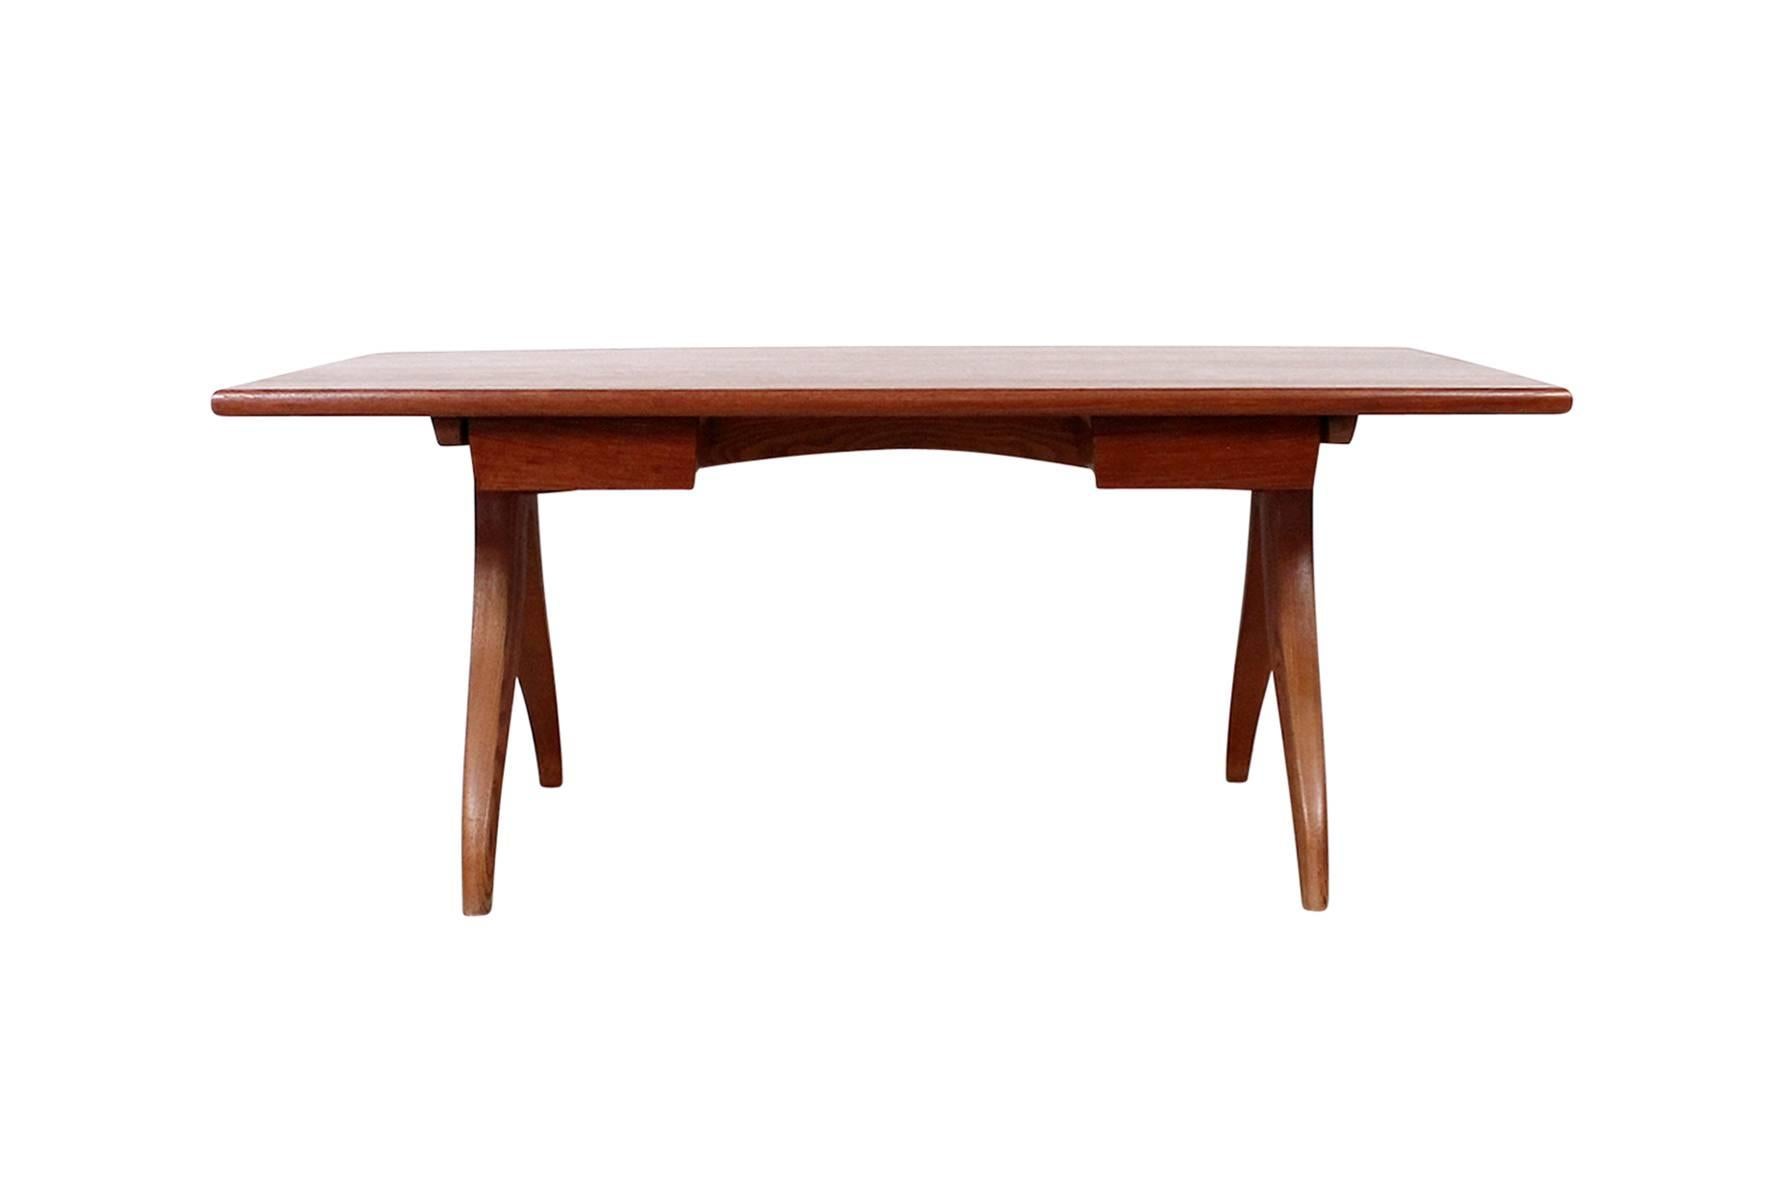 Rare studio furniture desk in fruitwood by Jere Osgood. Desk features a solid top with two slide out drawers and sculptural base. Signed and dated to 1976. Osgood's work can be seen in renowned collections including the Museum of Fine Arts, Boston,